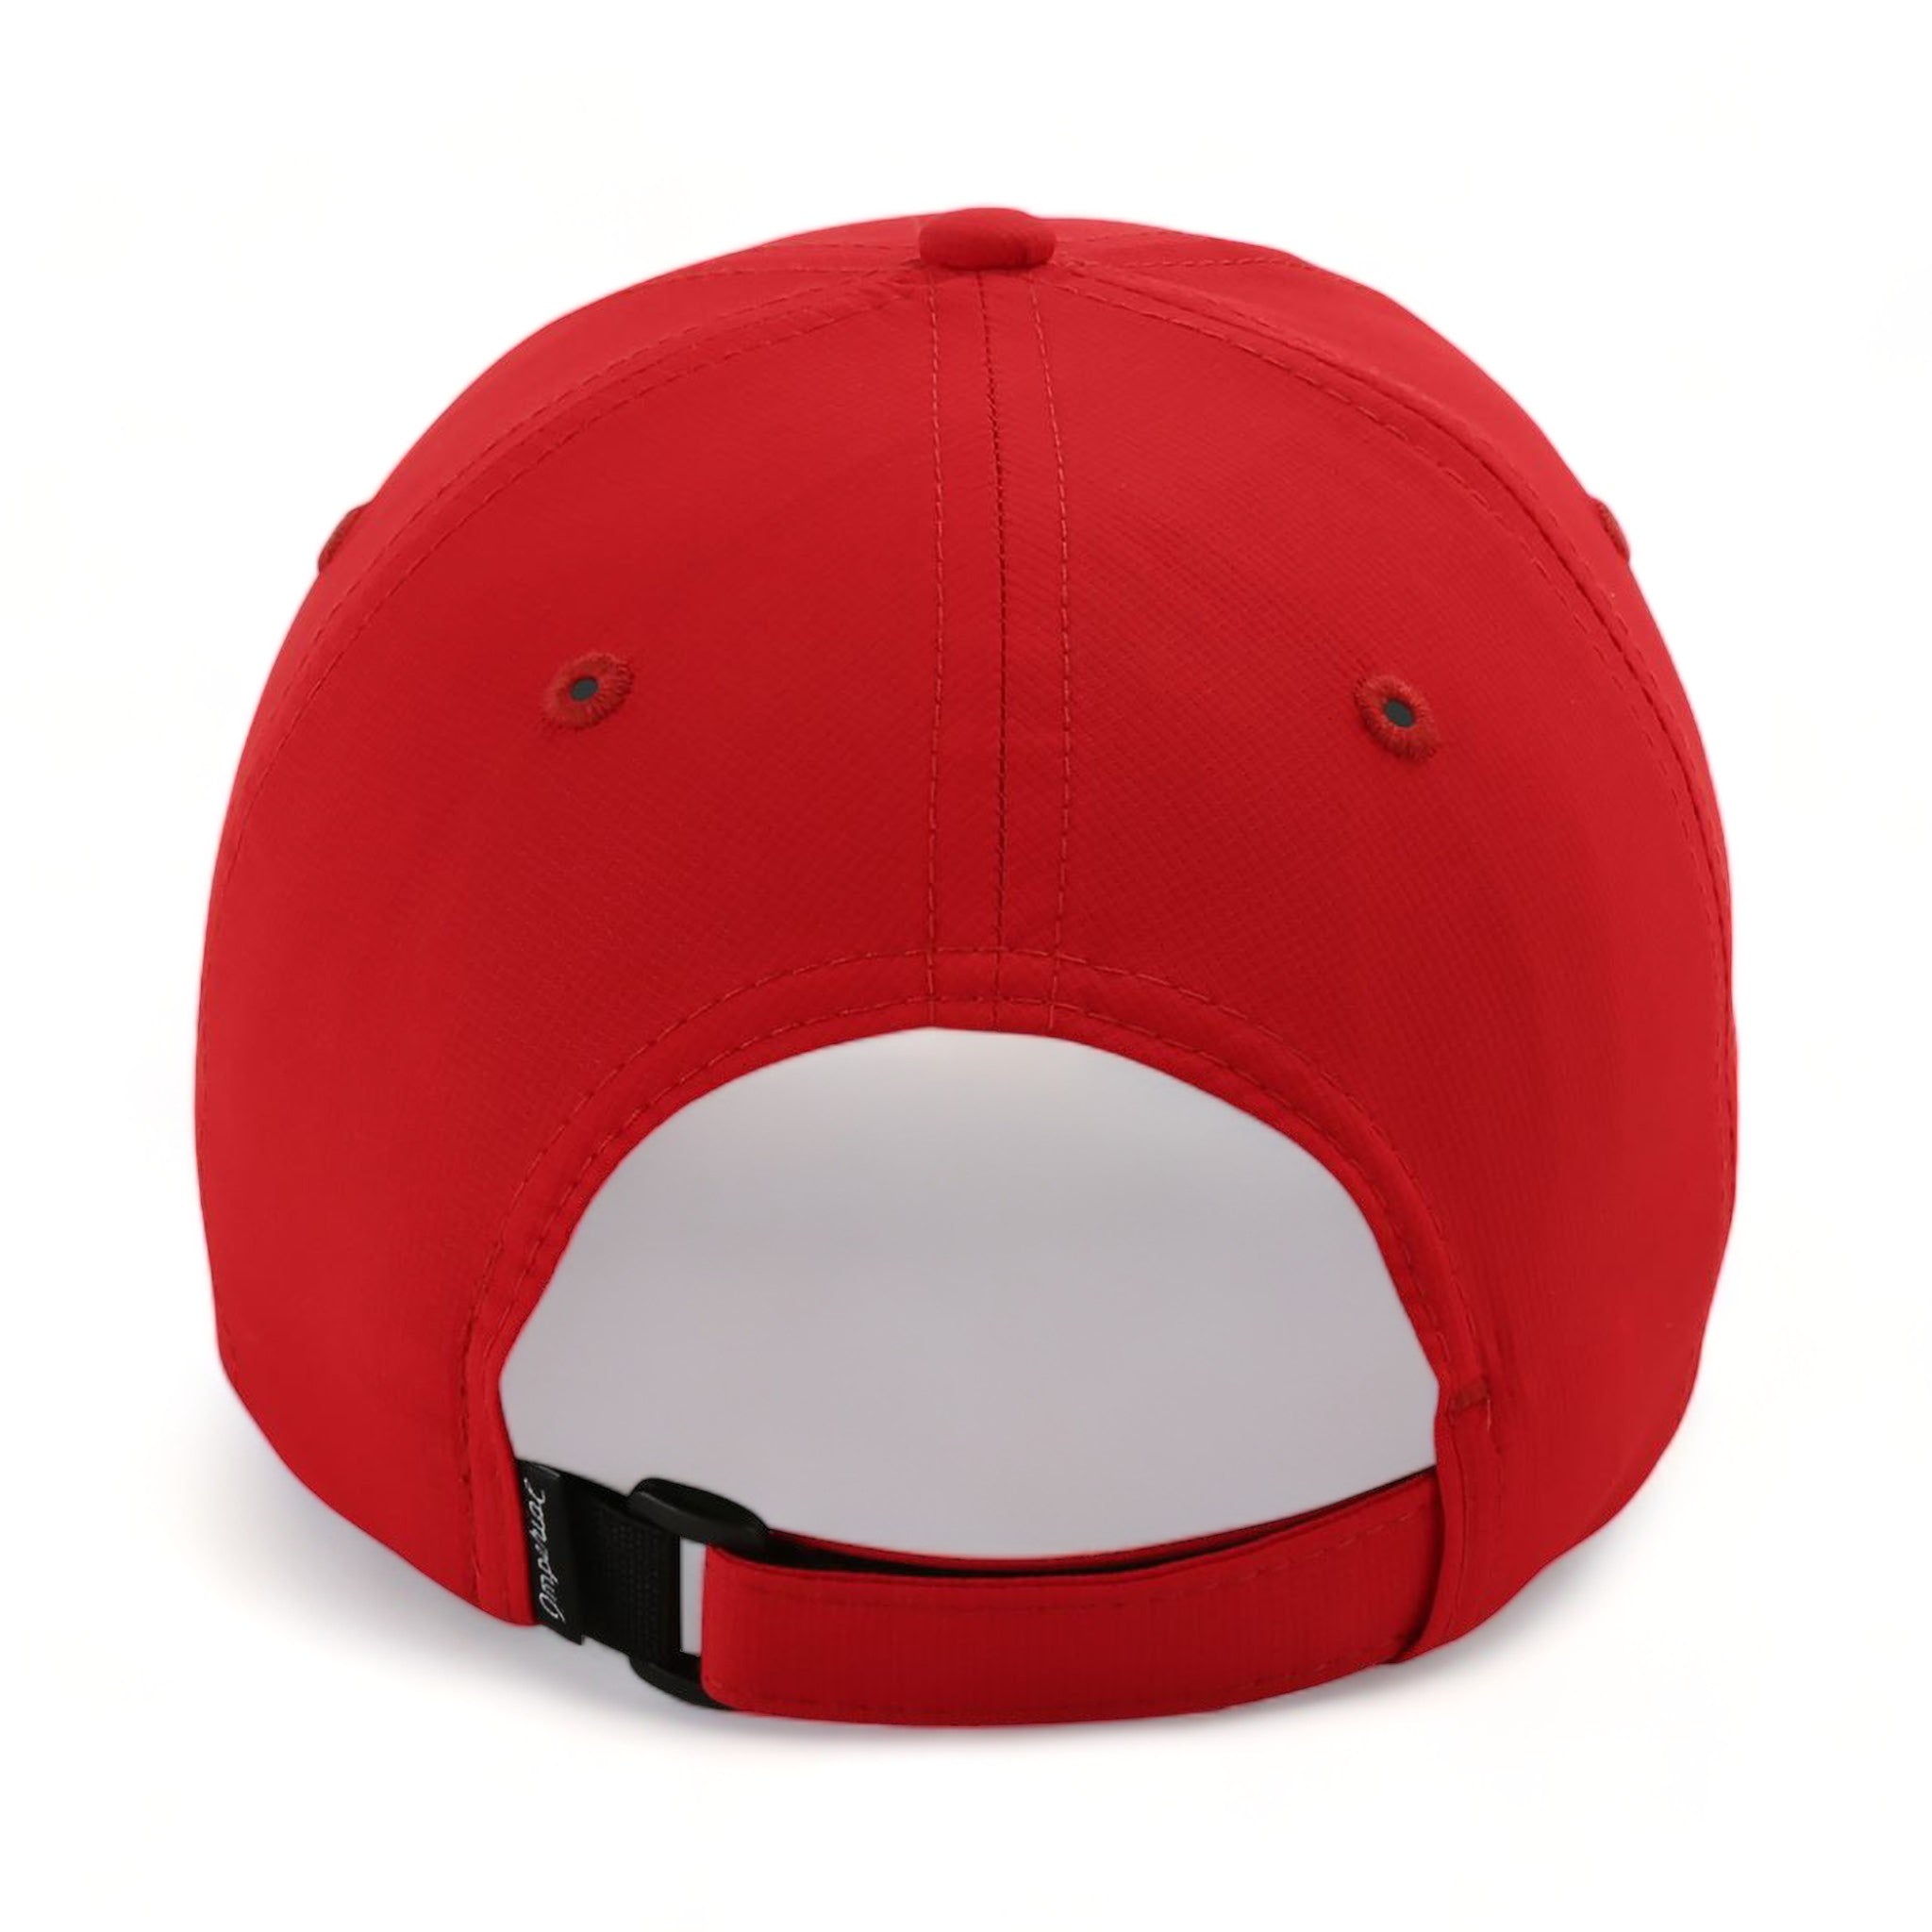 Back view of Imperial X210P custom hat in red pepper